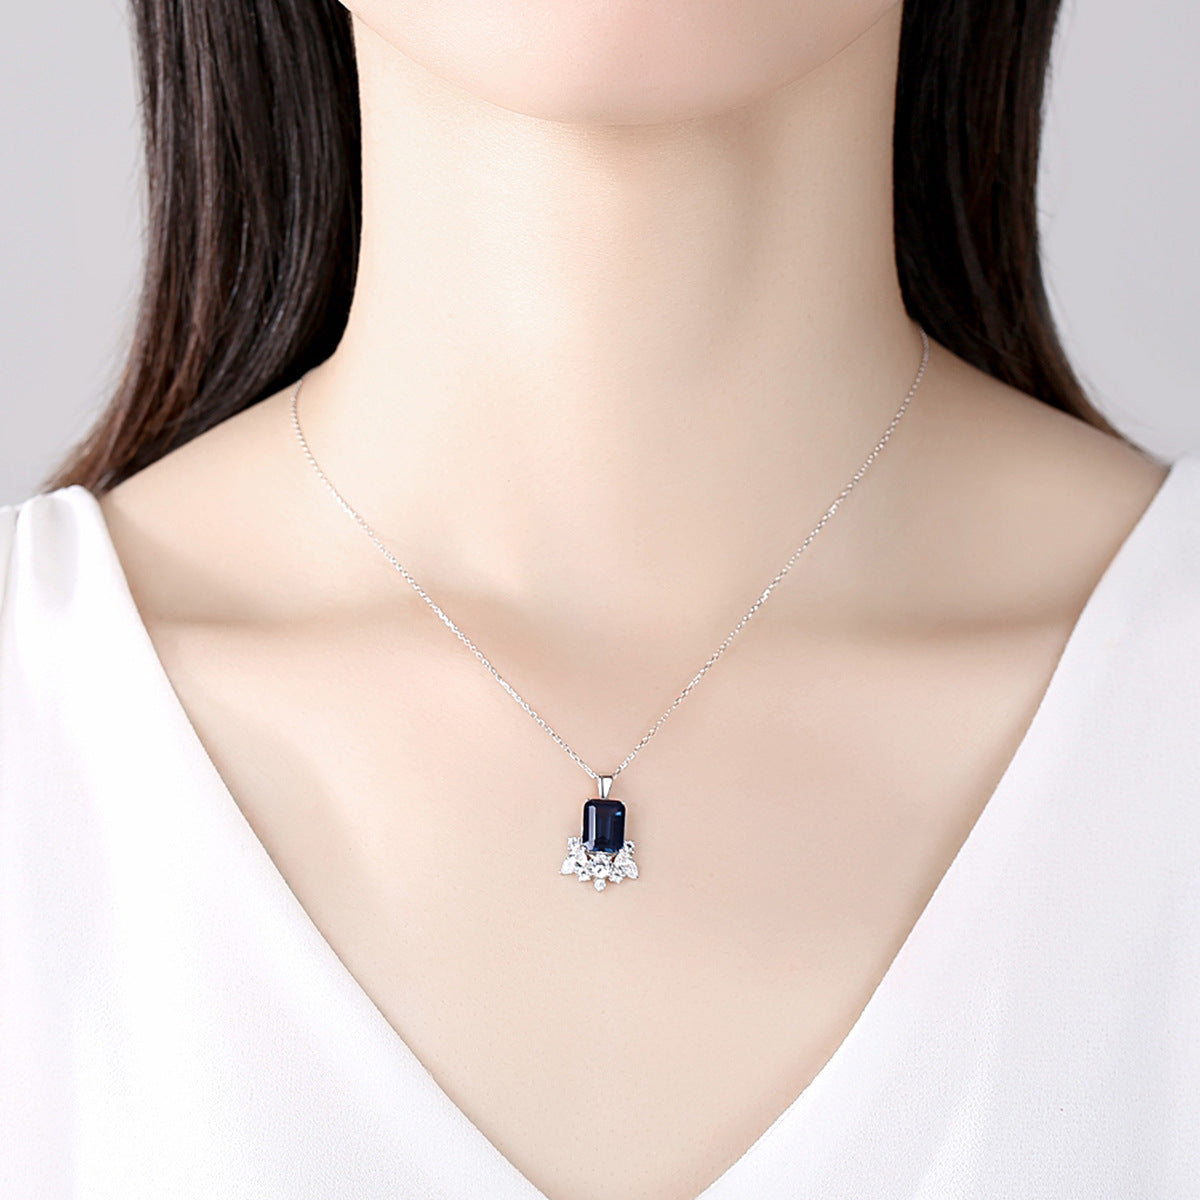 Gemstonely- Trendy and Fashionable: 925 Silver Necklace with Synthetic Gemstone Pendant on Lock Chain